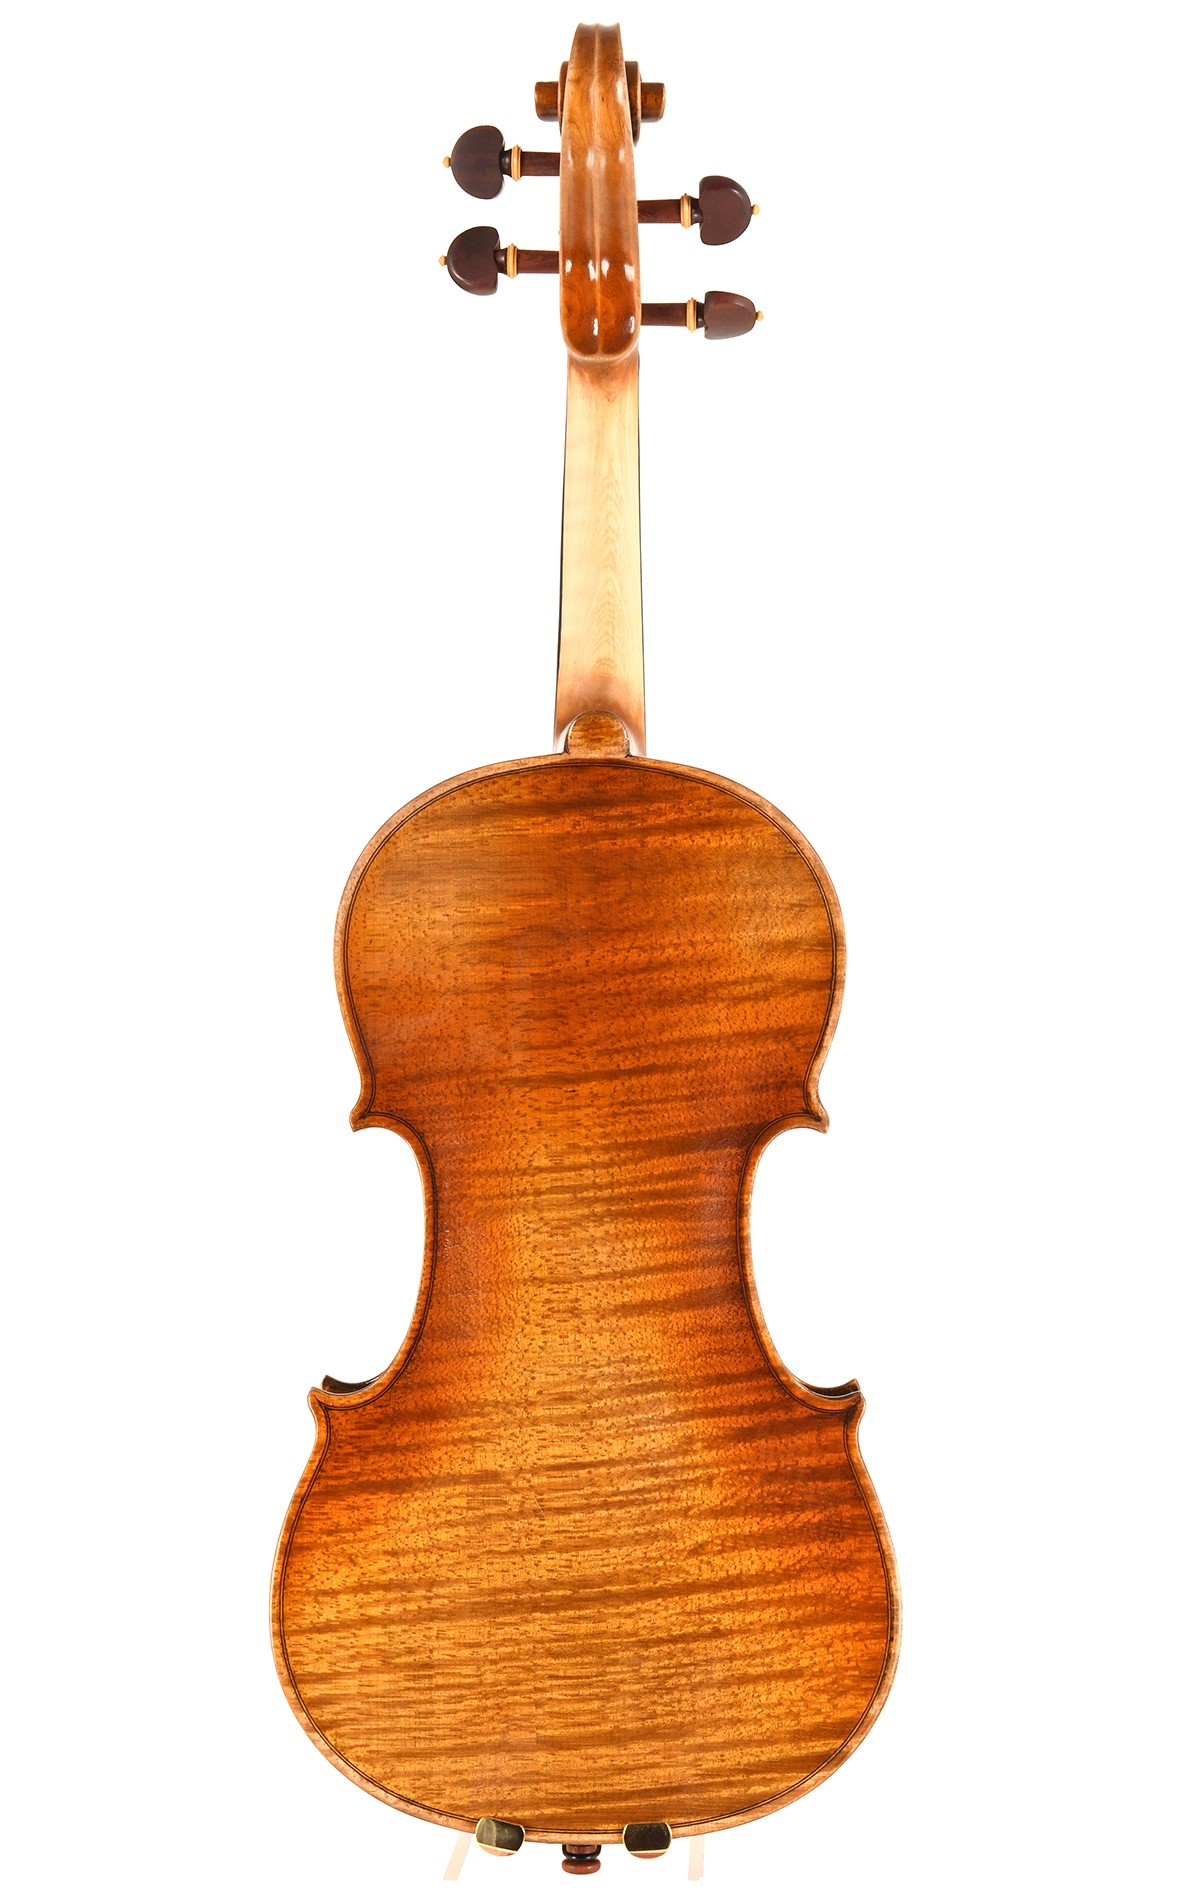 Violin opus 12 from the "CV Selectio" portfolio - meets sophisticated musical standards (set)